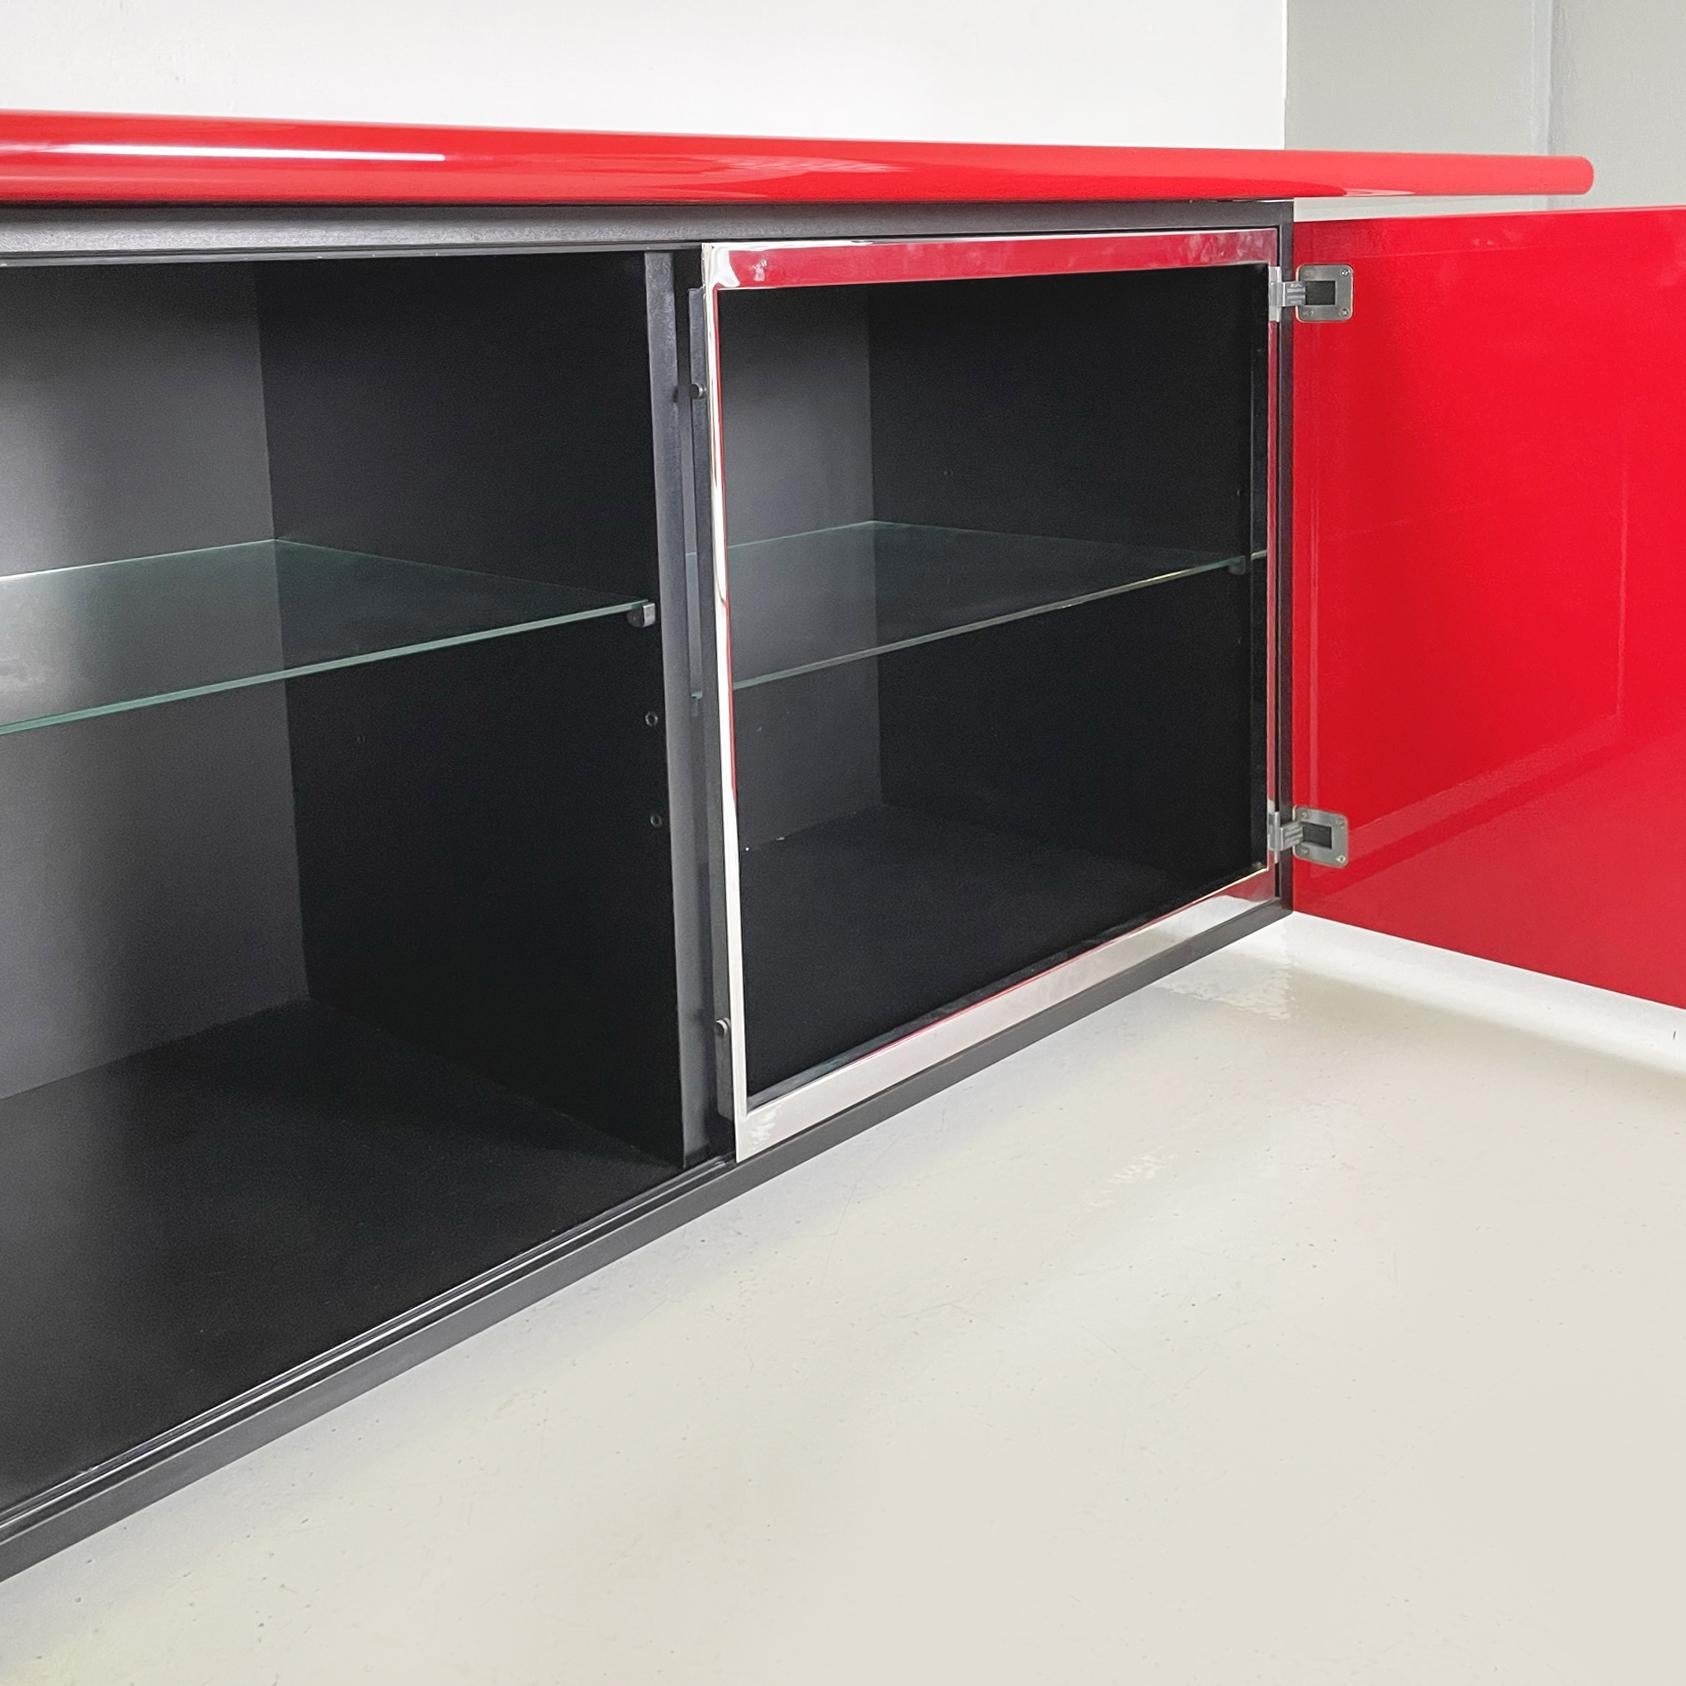 Italian Modern Red Sideboard Sheraton by Stoppino and Acerbis for Acerbis, 1977 For Sale 9